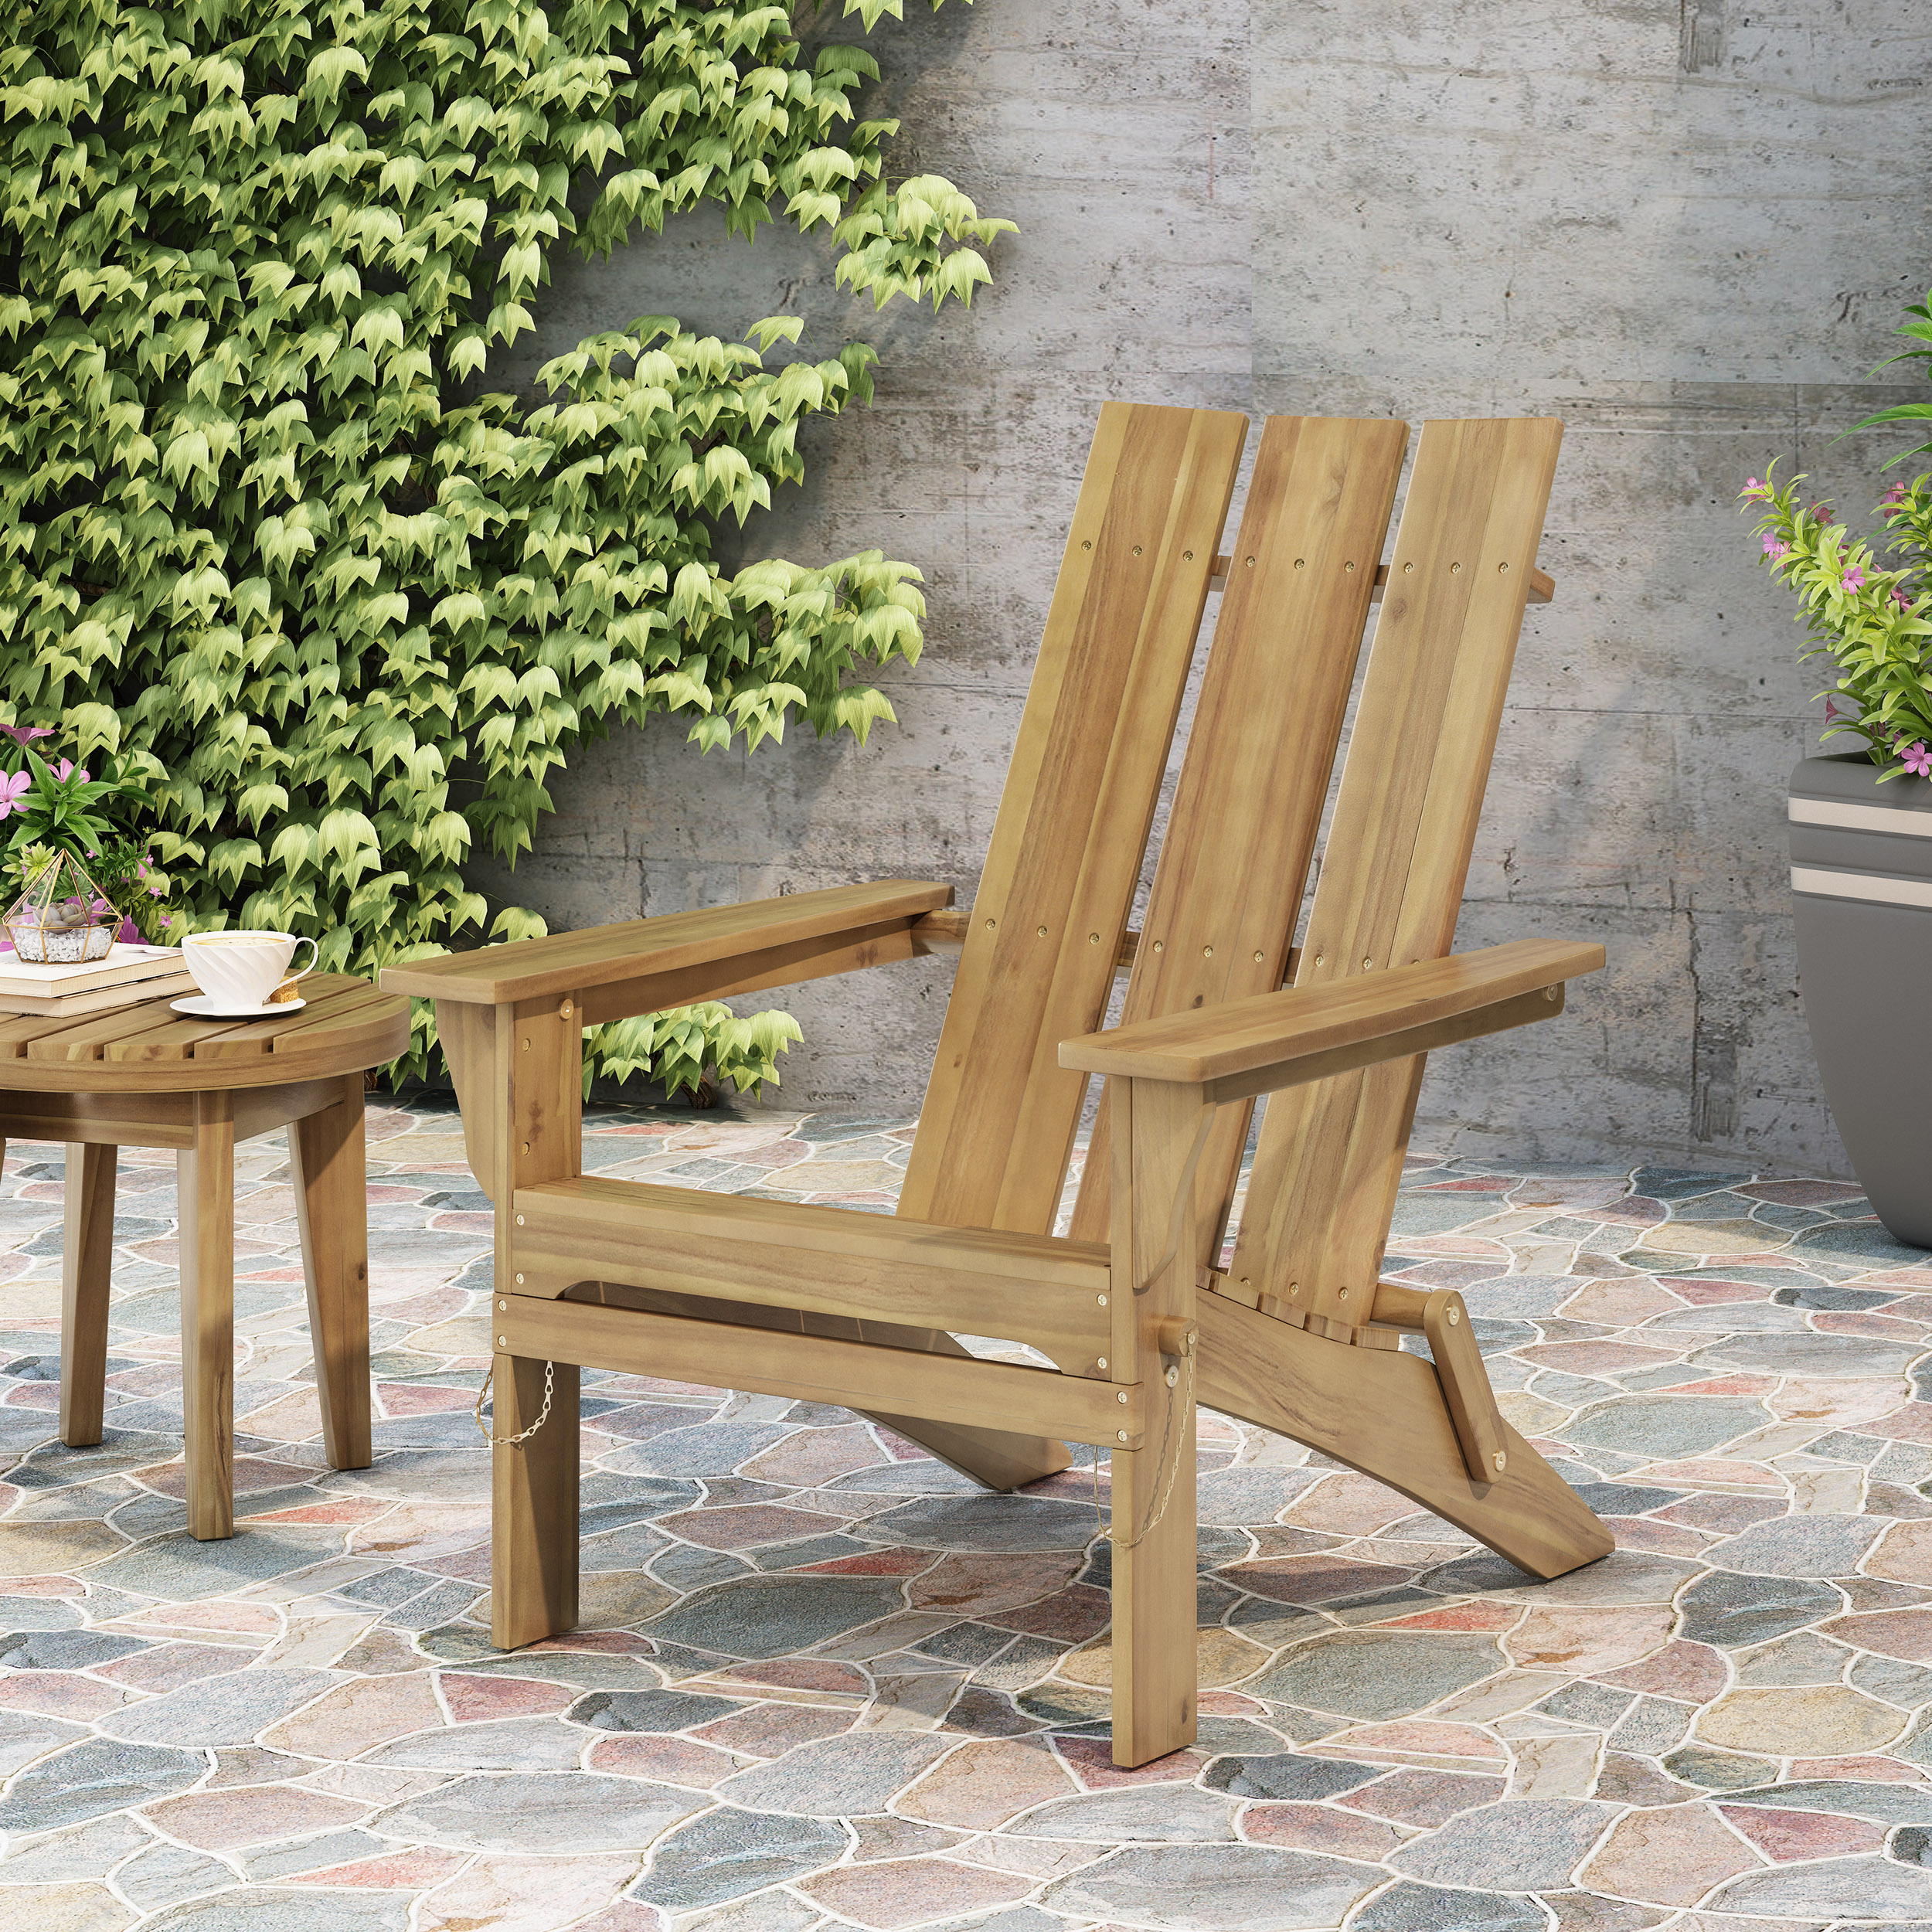 LANTRO JS Outdoor Classic Natural Color Solid Wood Adirondack Chair Garden Lounge Chair - image 1 of 5